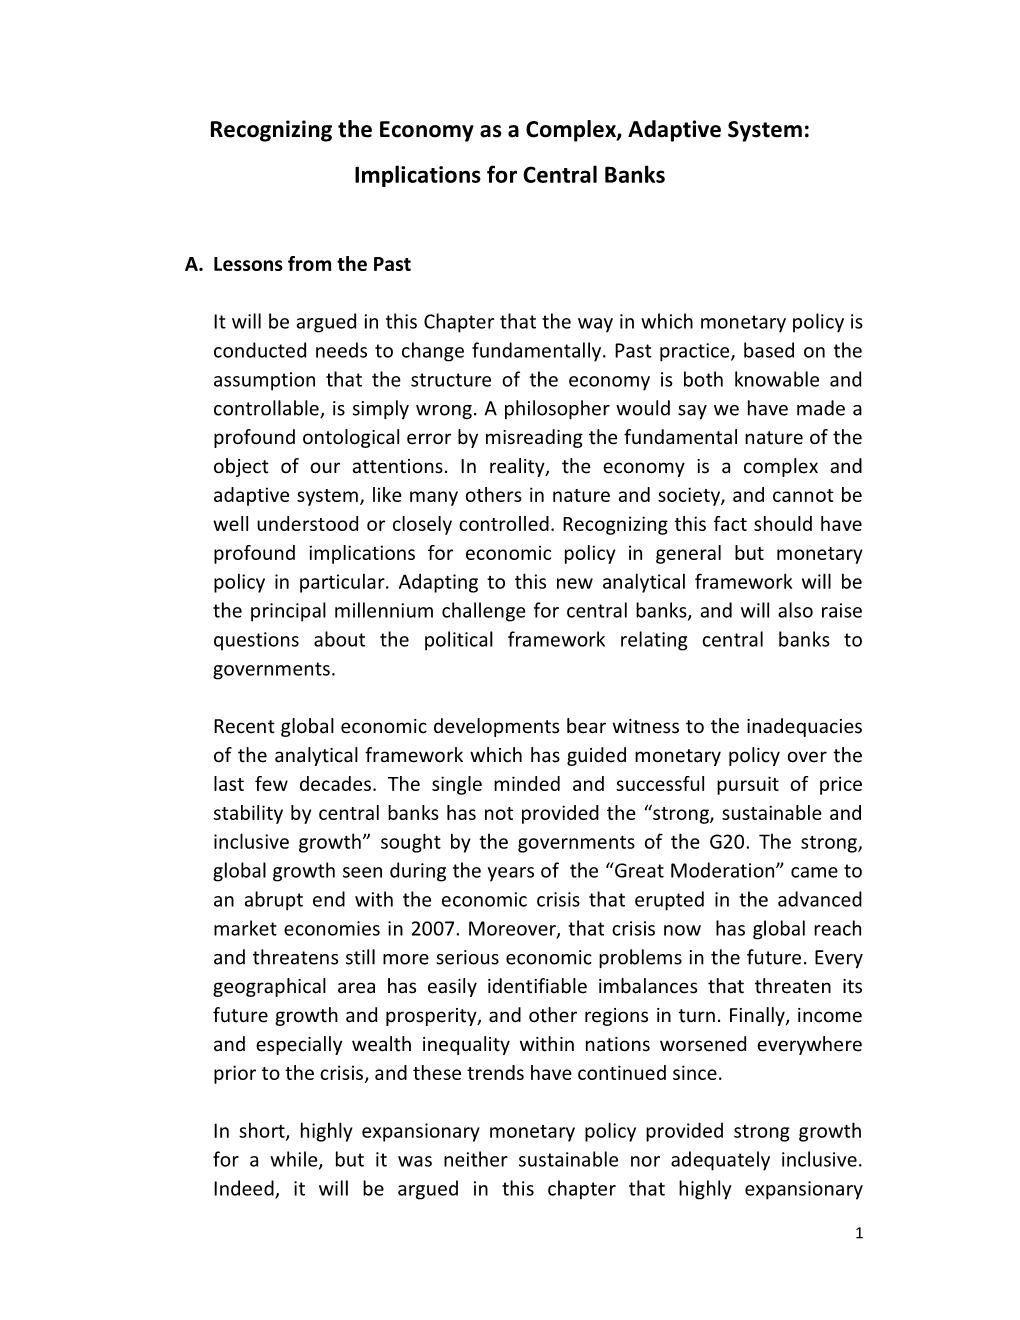 Recognizing the Economy As a Complex, Adaptive System: Implications for Central Banks